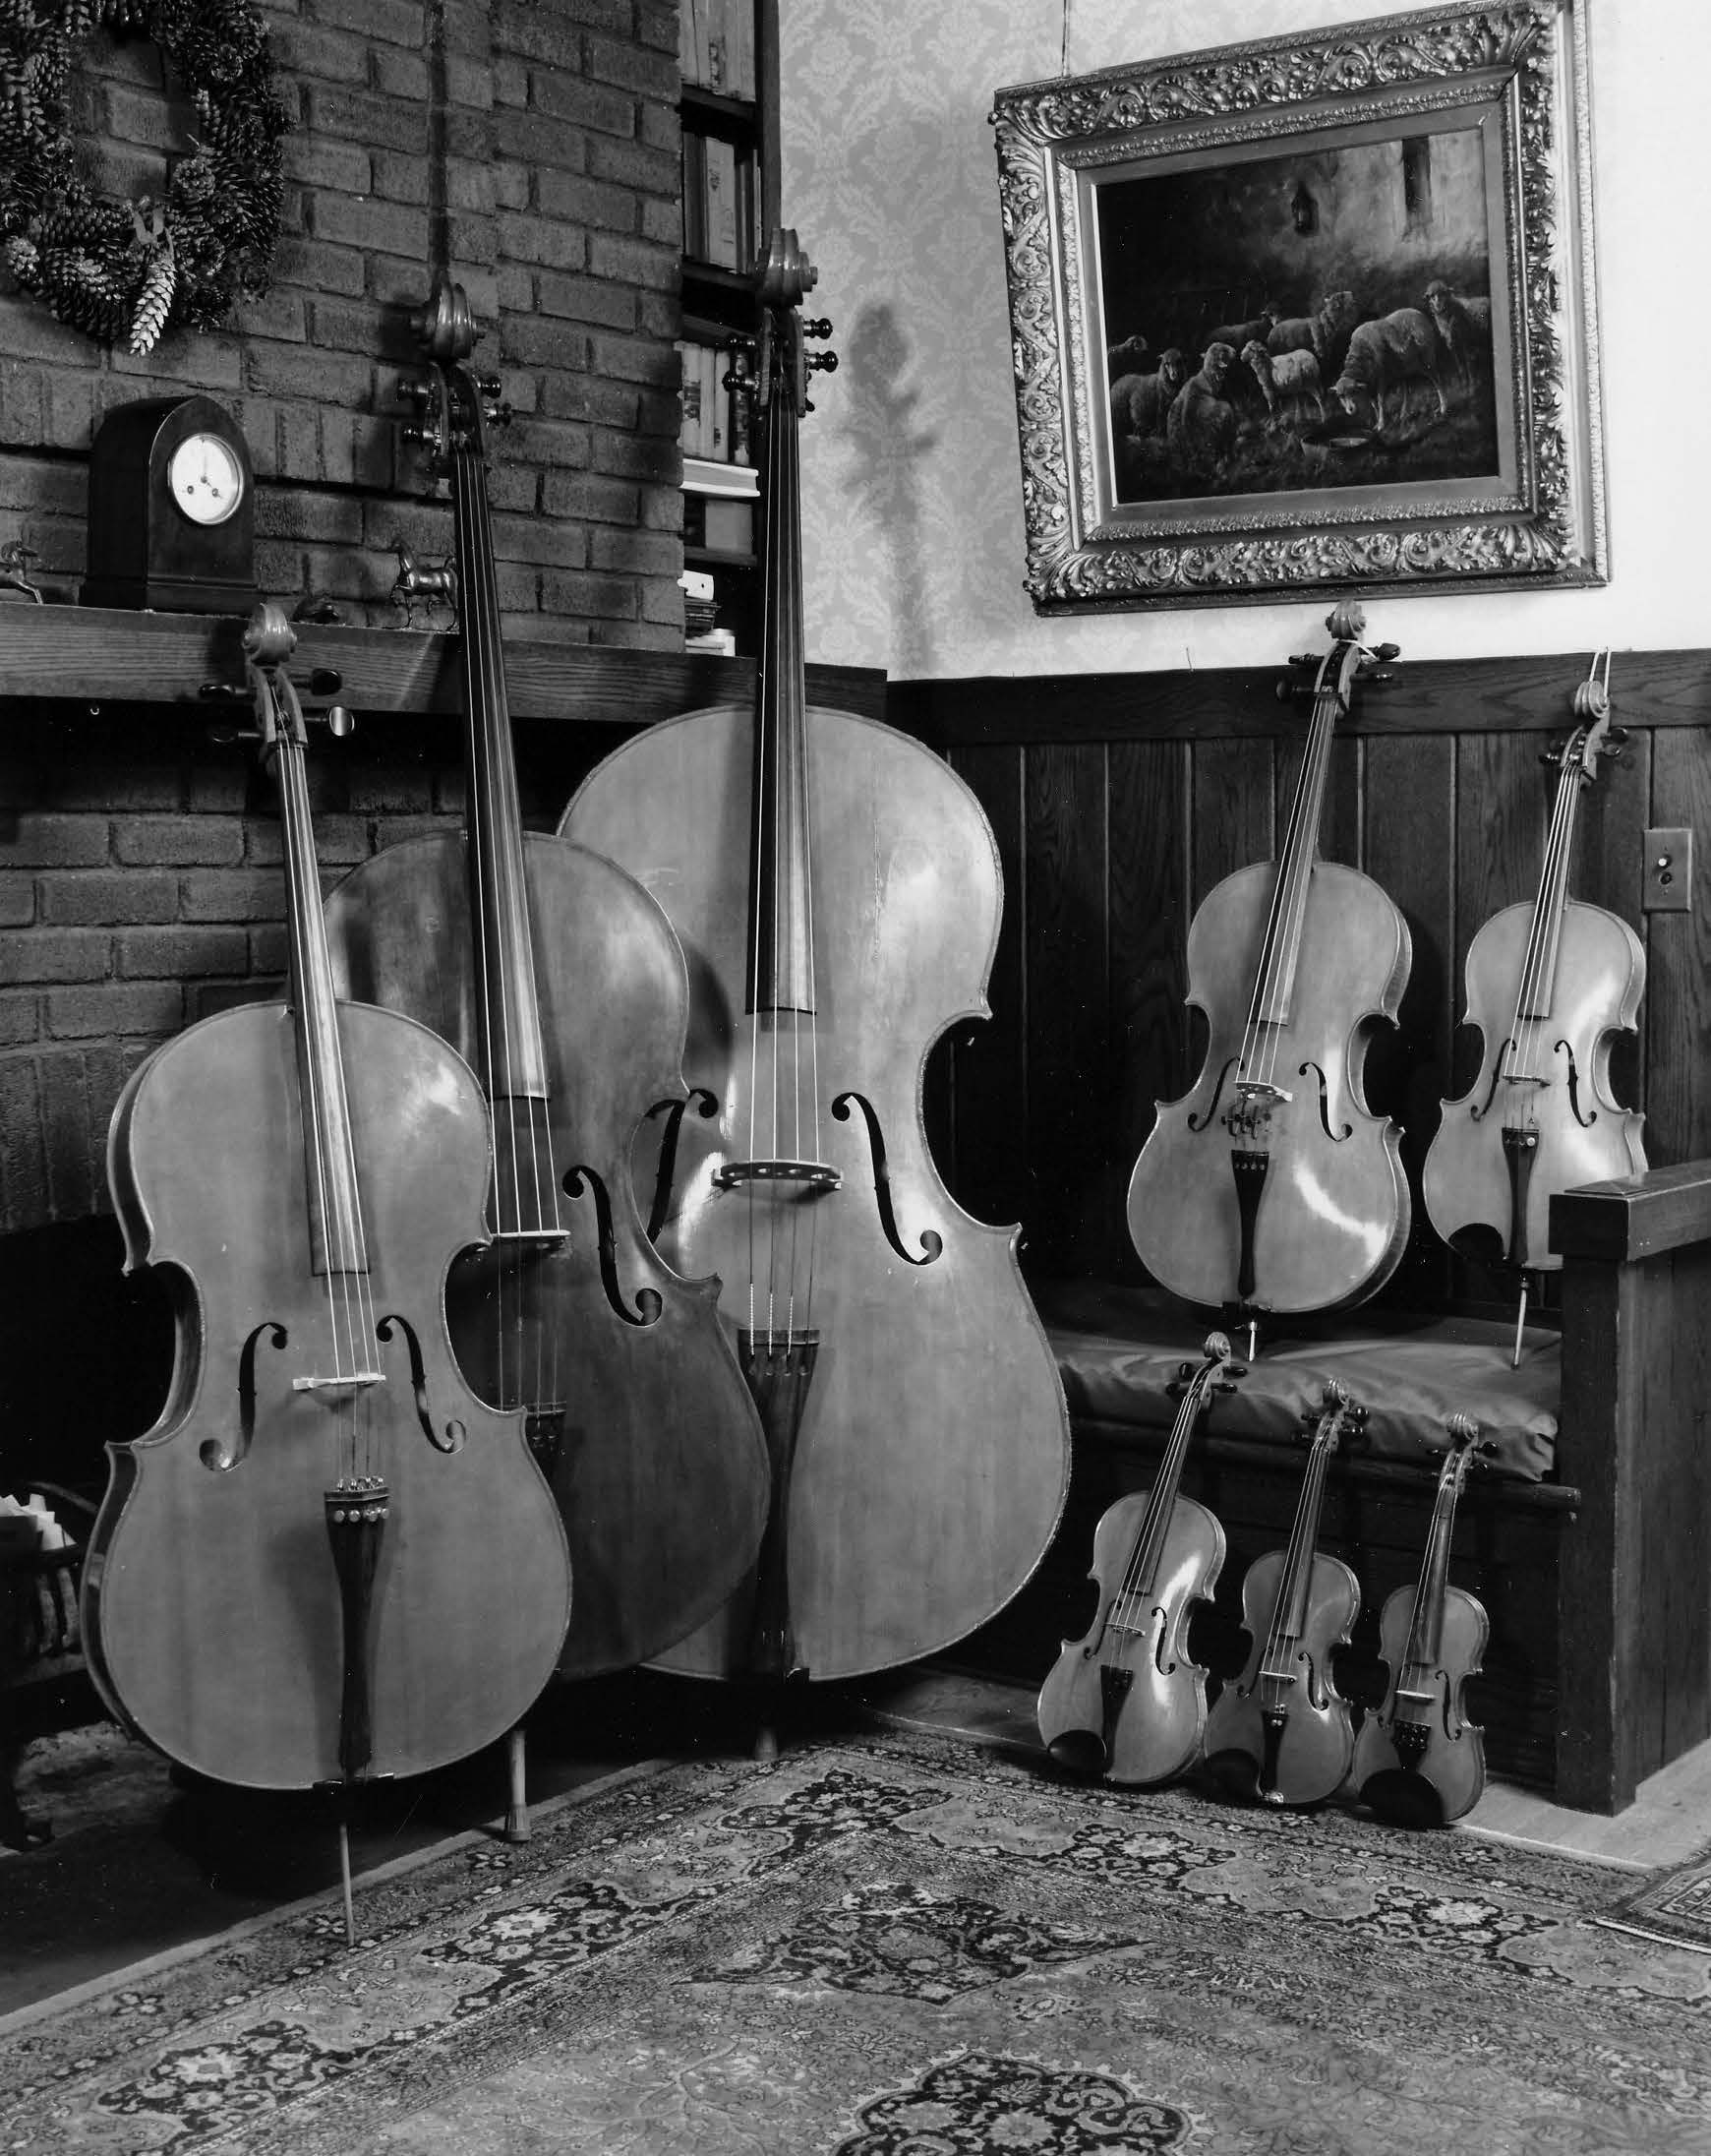 Carleen Hutchins' violin octet: a family of eight violins spanning the tonal range of a piano. Courtesy of the Hutchins estate